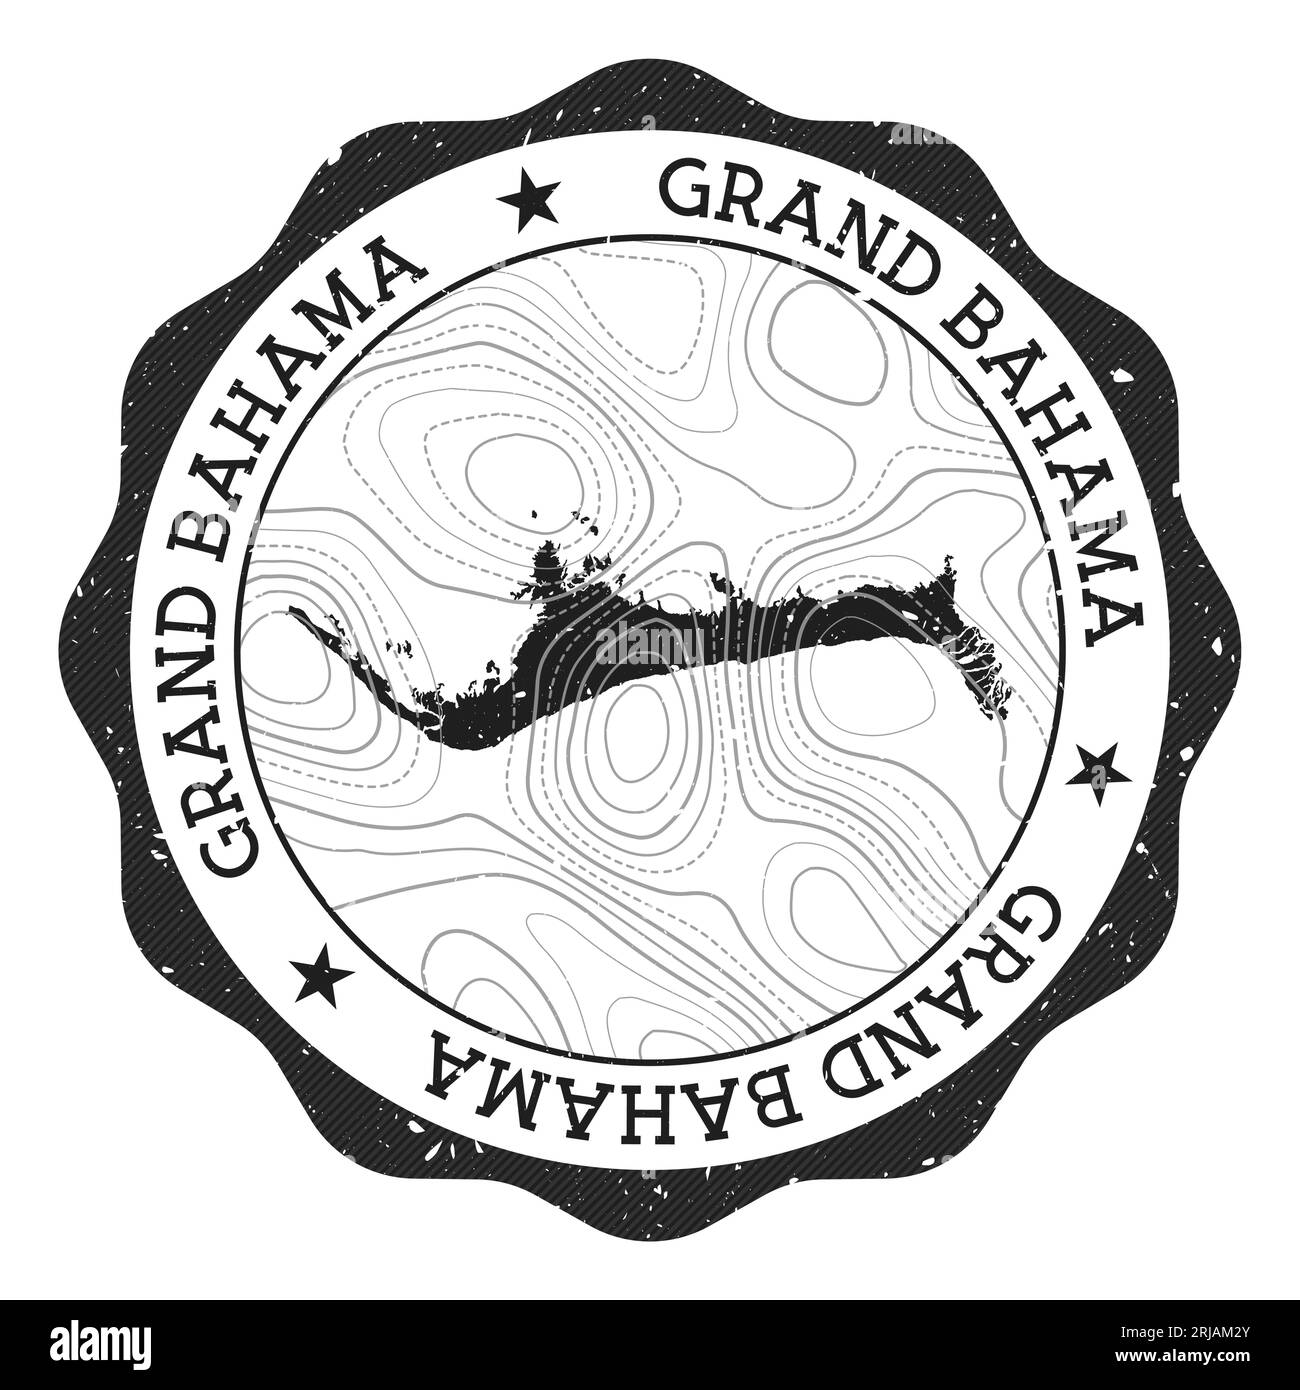 Grand Bahama outdoor stamp. Round sticker with map of island with topographic isolines. Vector illustration. Can be used as insignia, logotype, label, Stock Vector